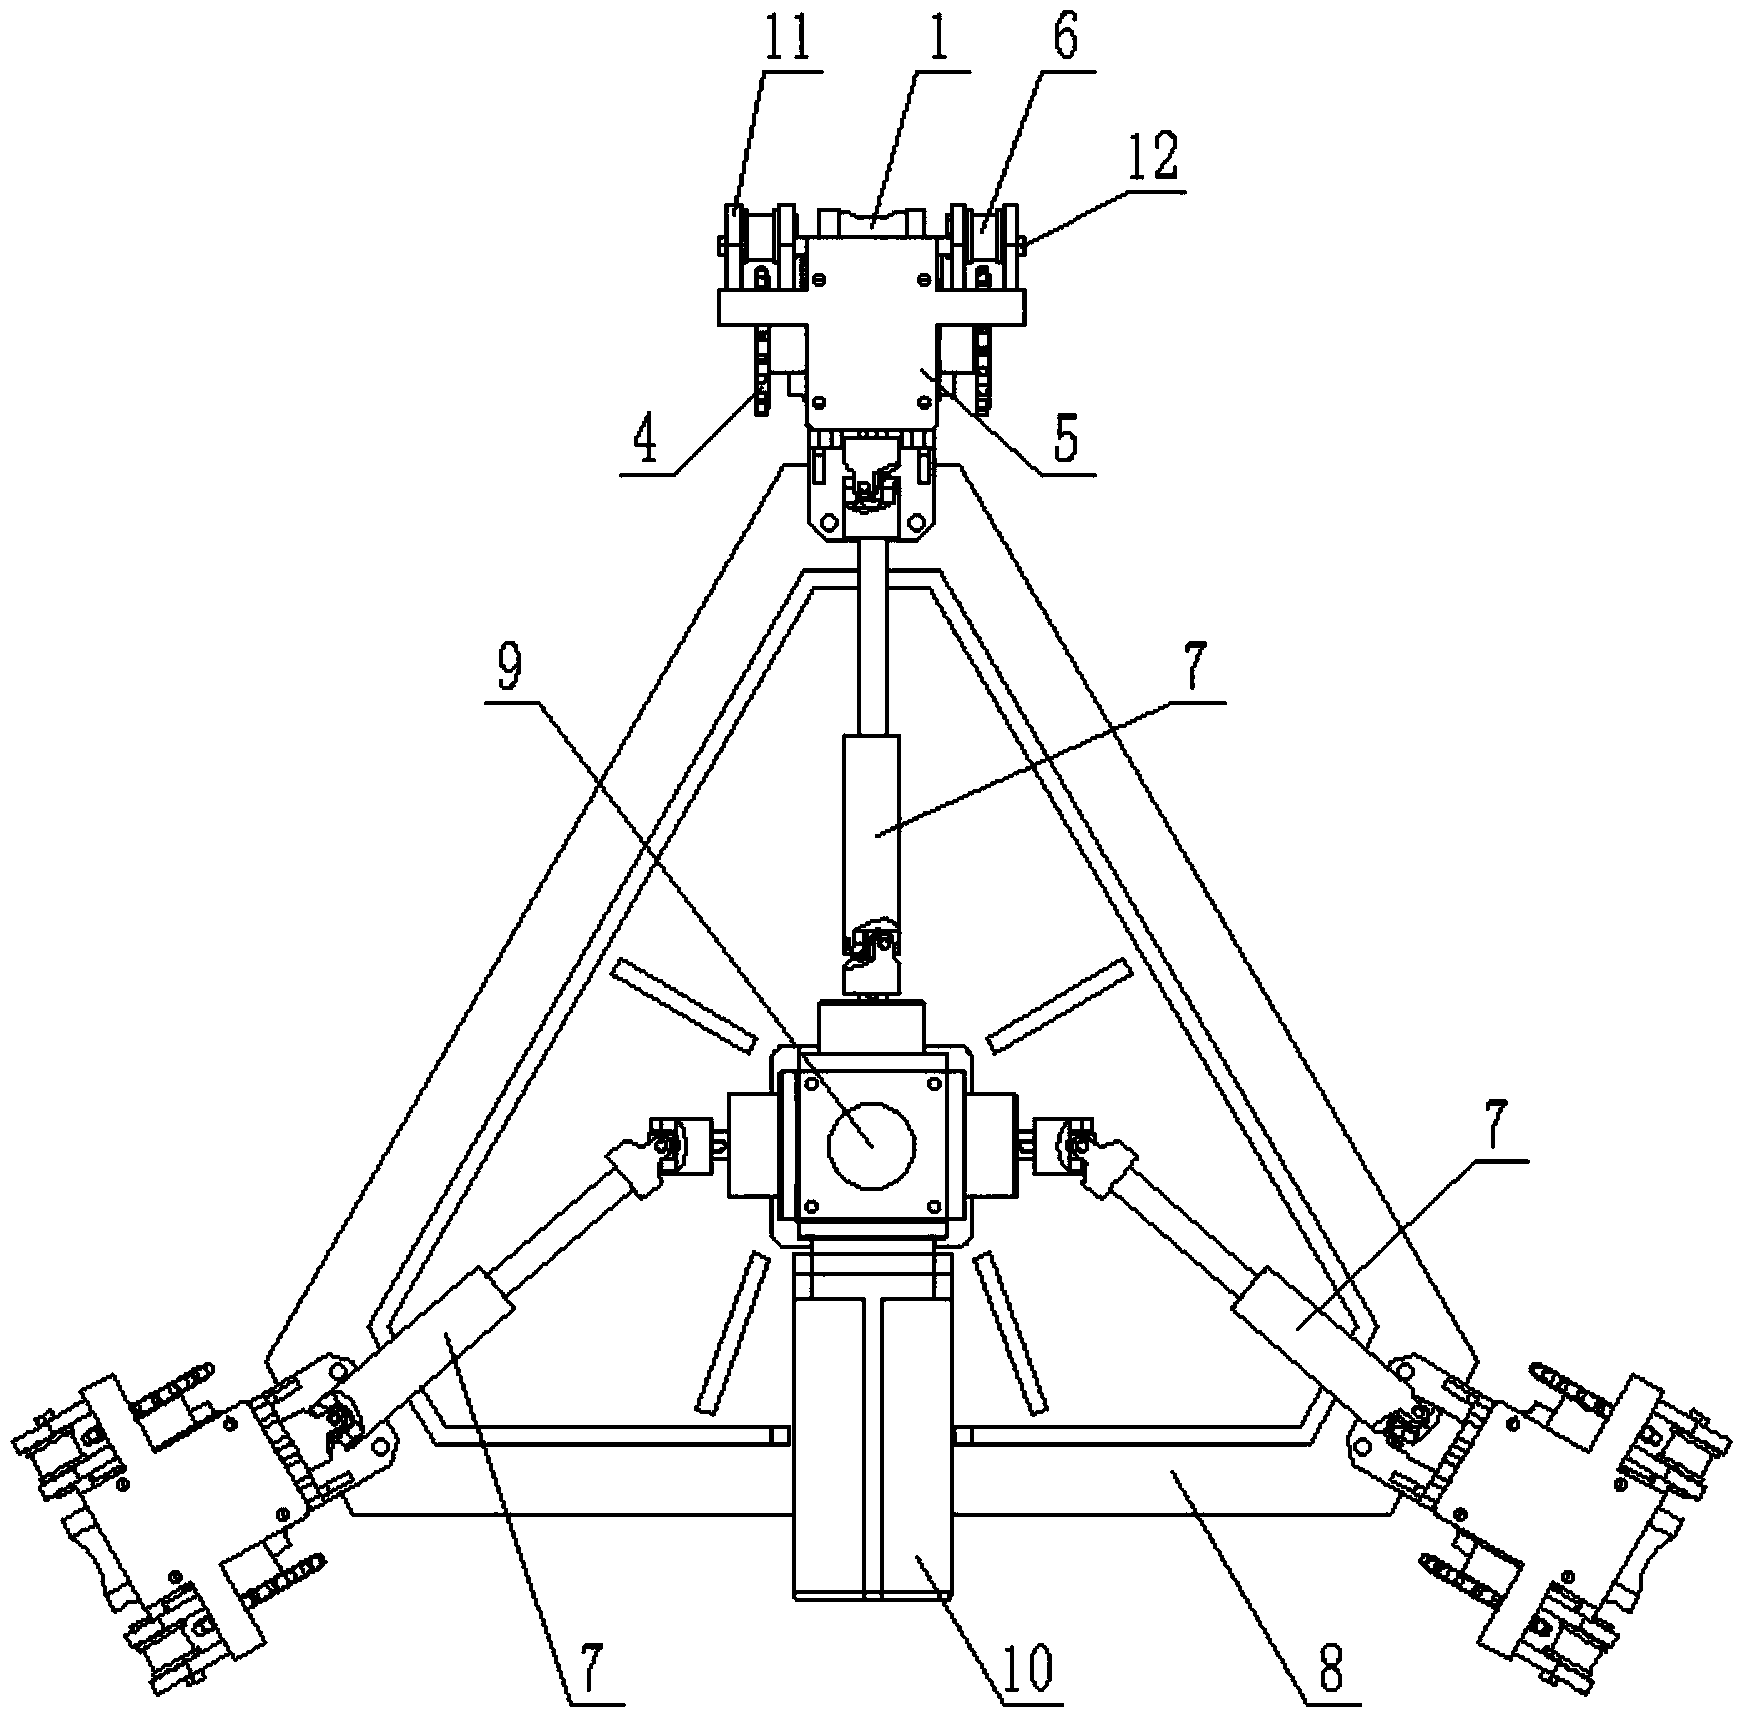 Three-upright-post portal support frame climbing device